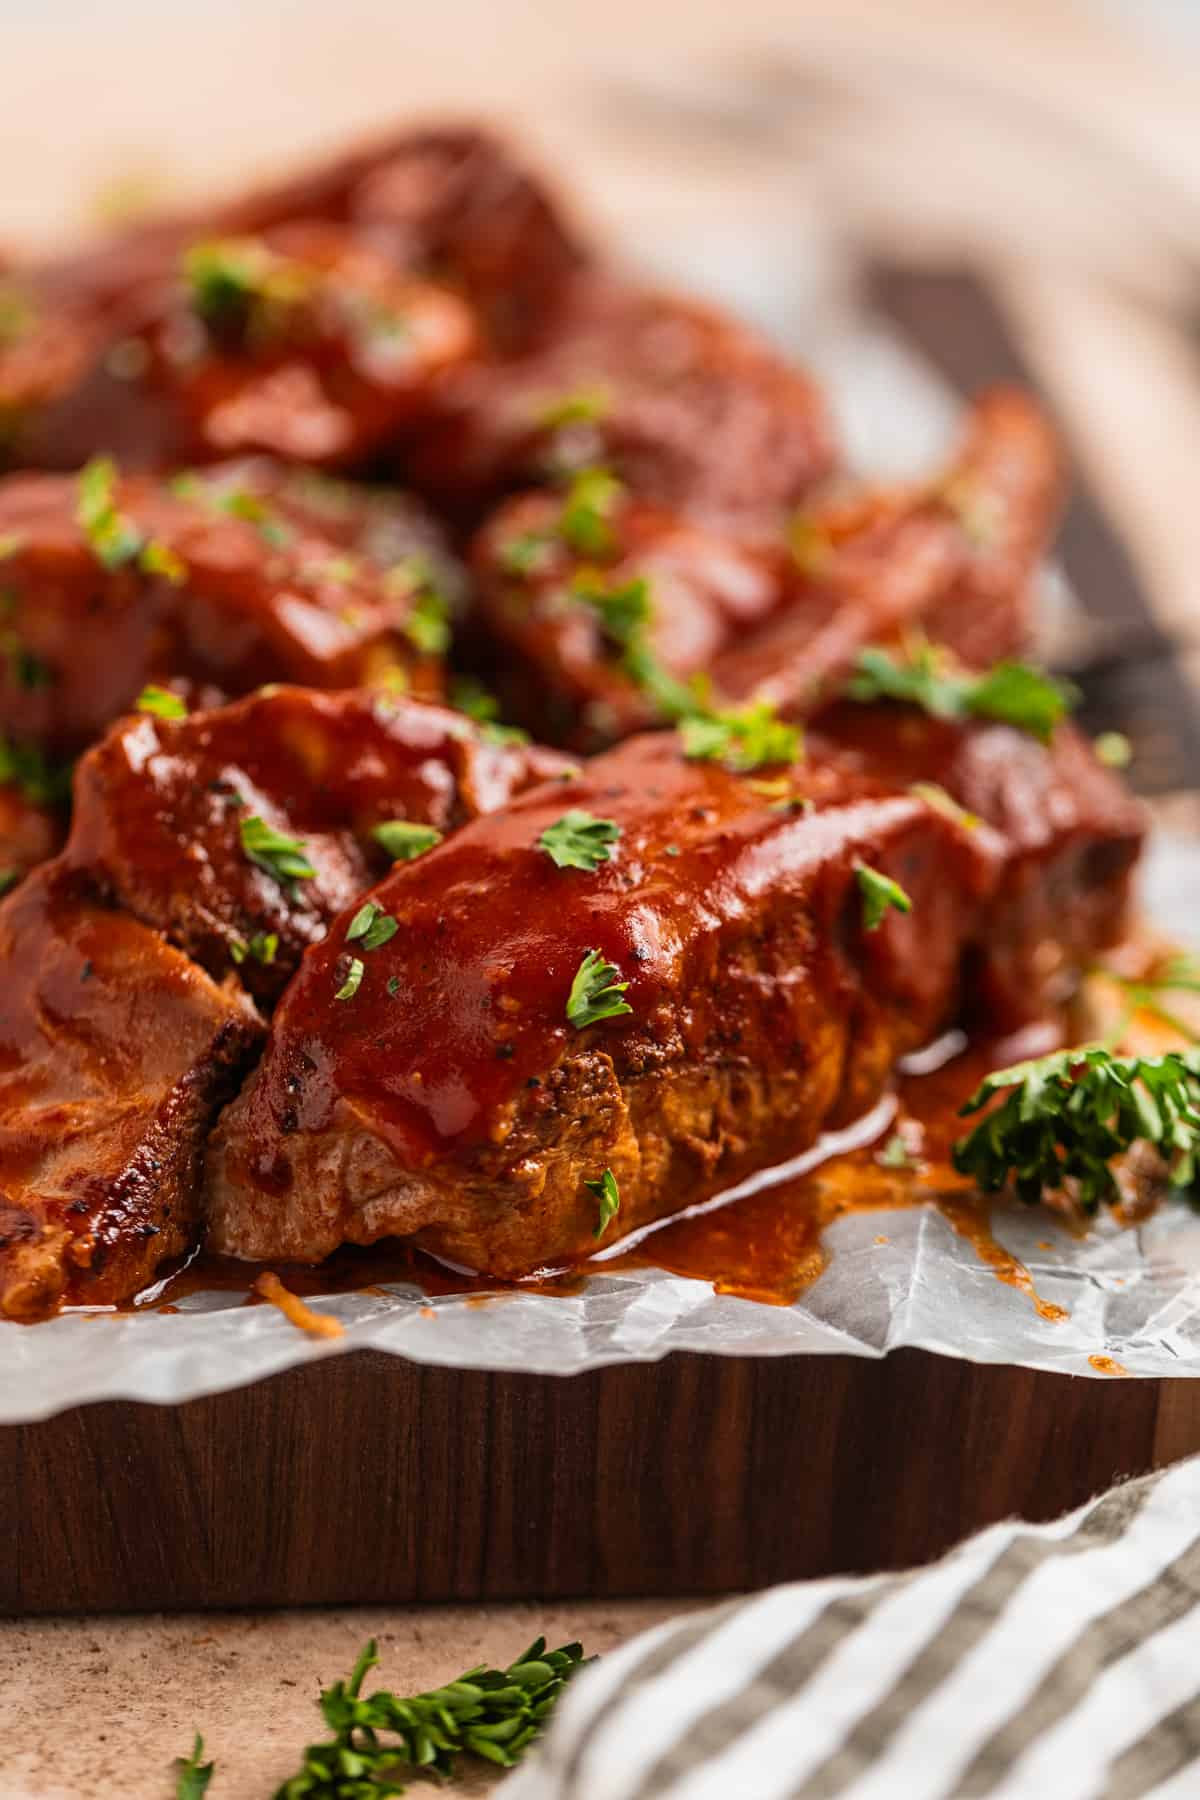 Country style BBQ ribs on wood board topped with wax paper and topped with parsley.